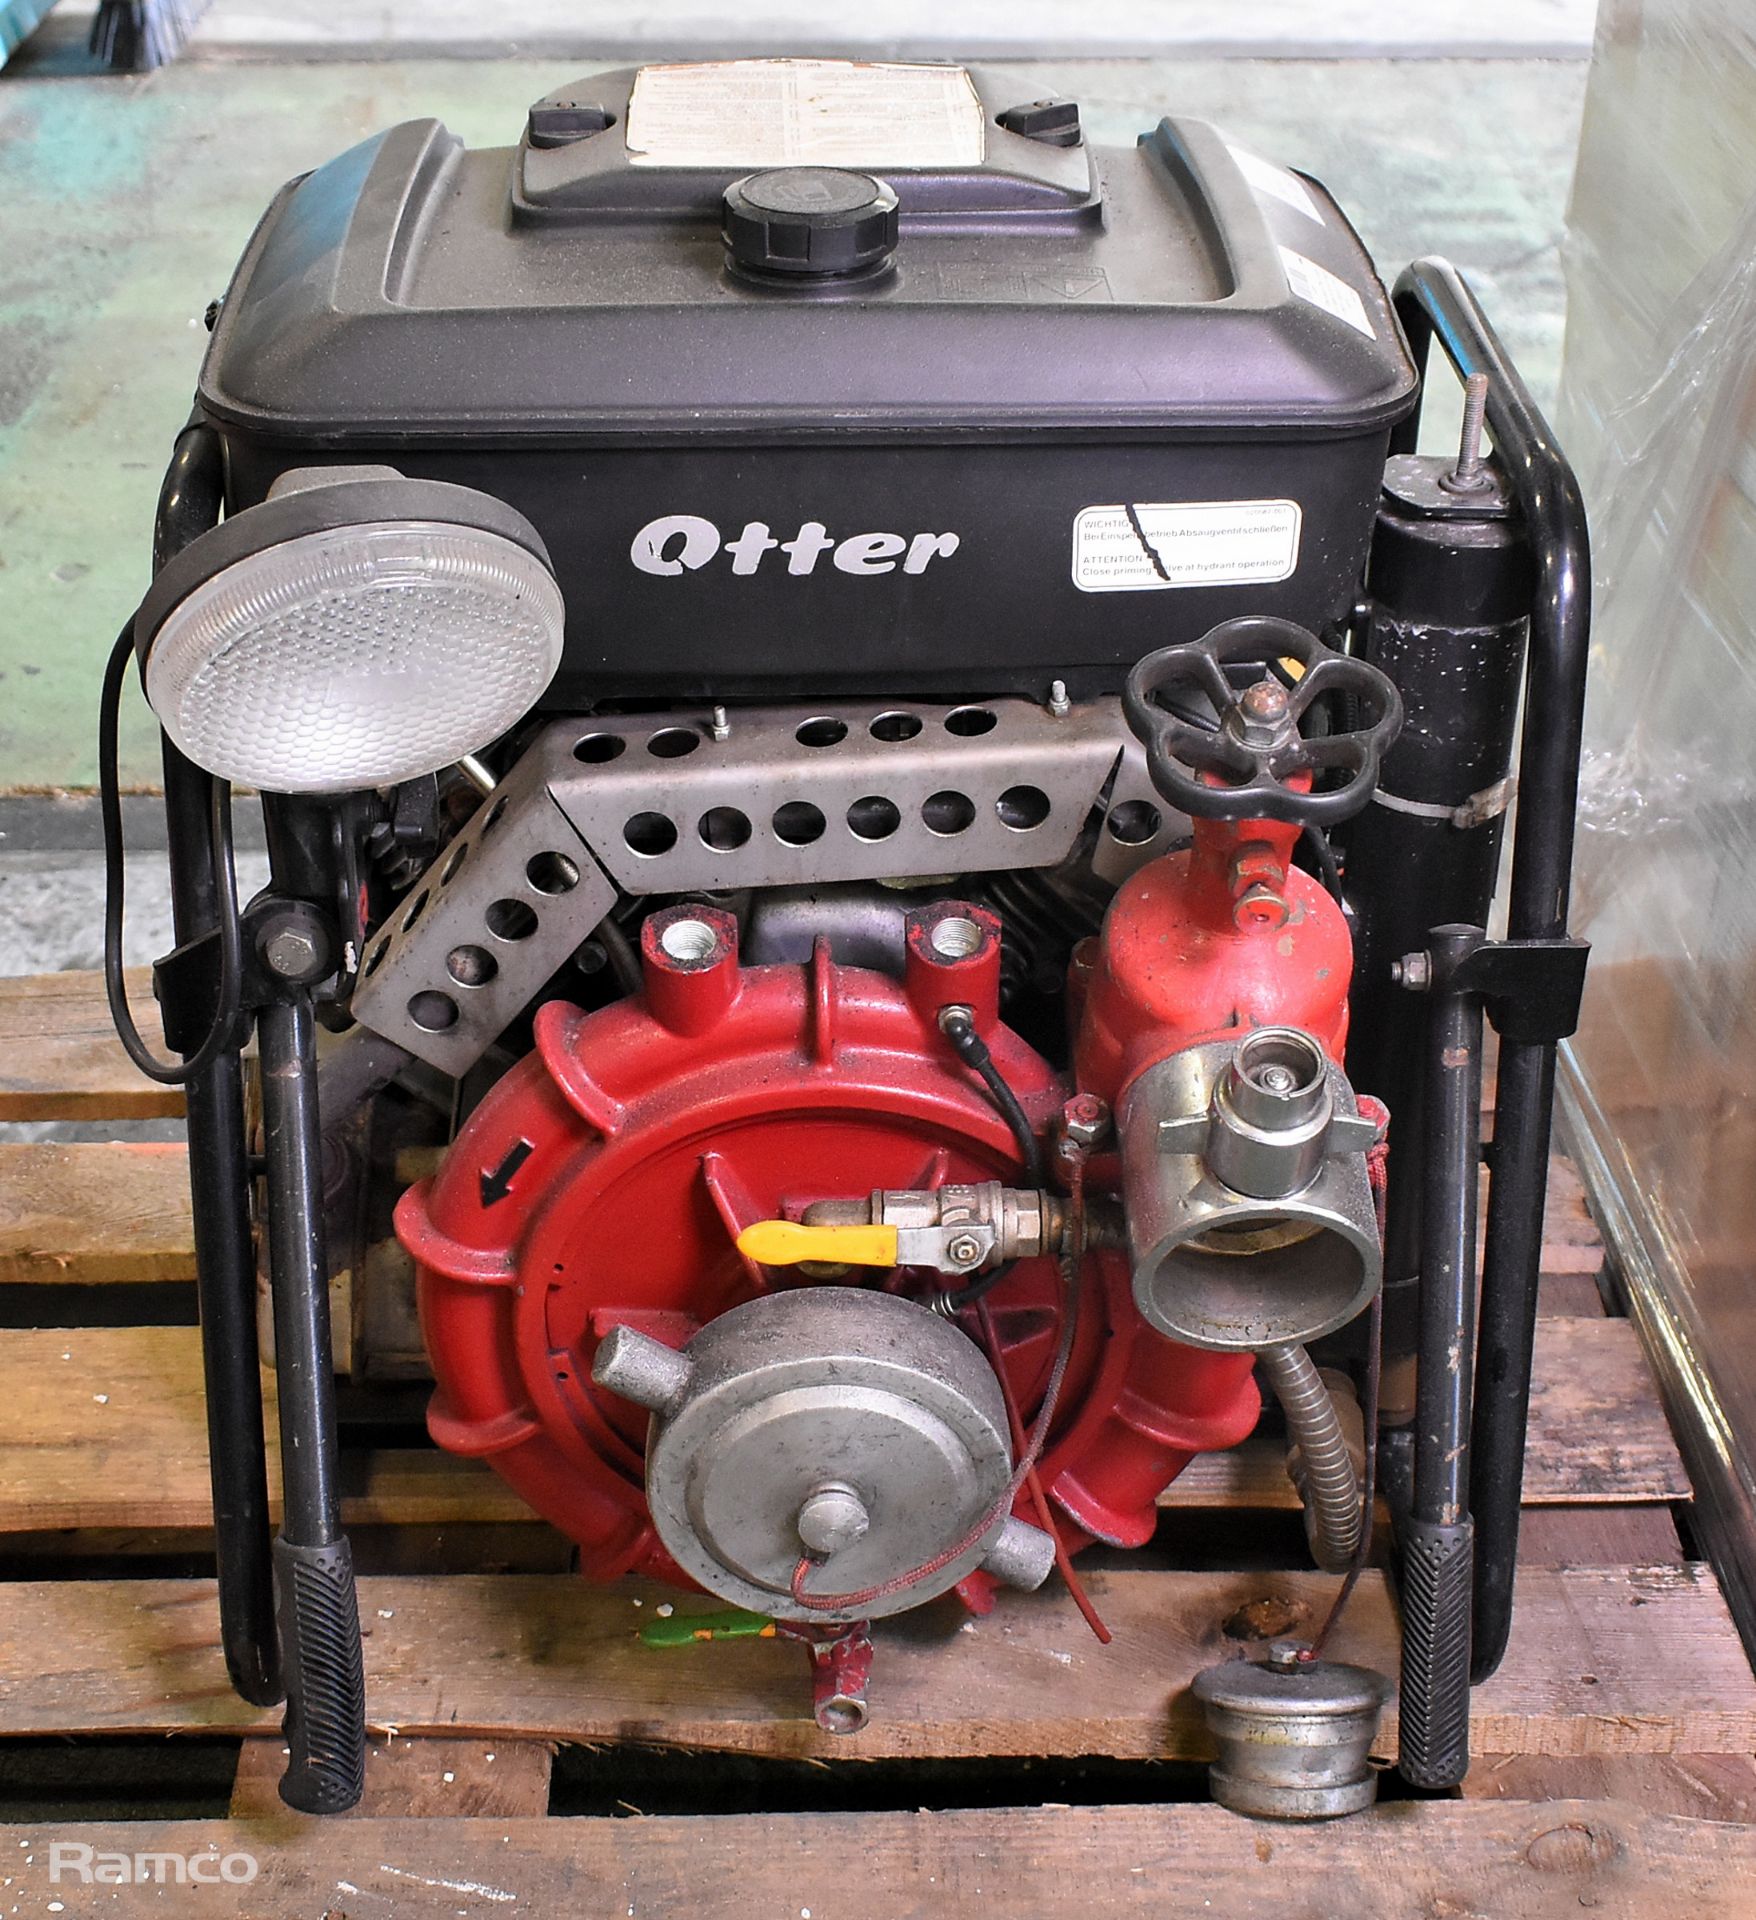 Rosenbauer Otter portable petrol water pump with Briggs & Stratton Vanguard 18HP engine - Image 4 of 8